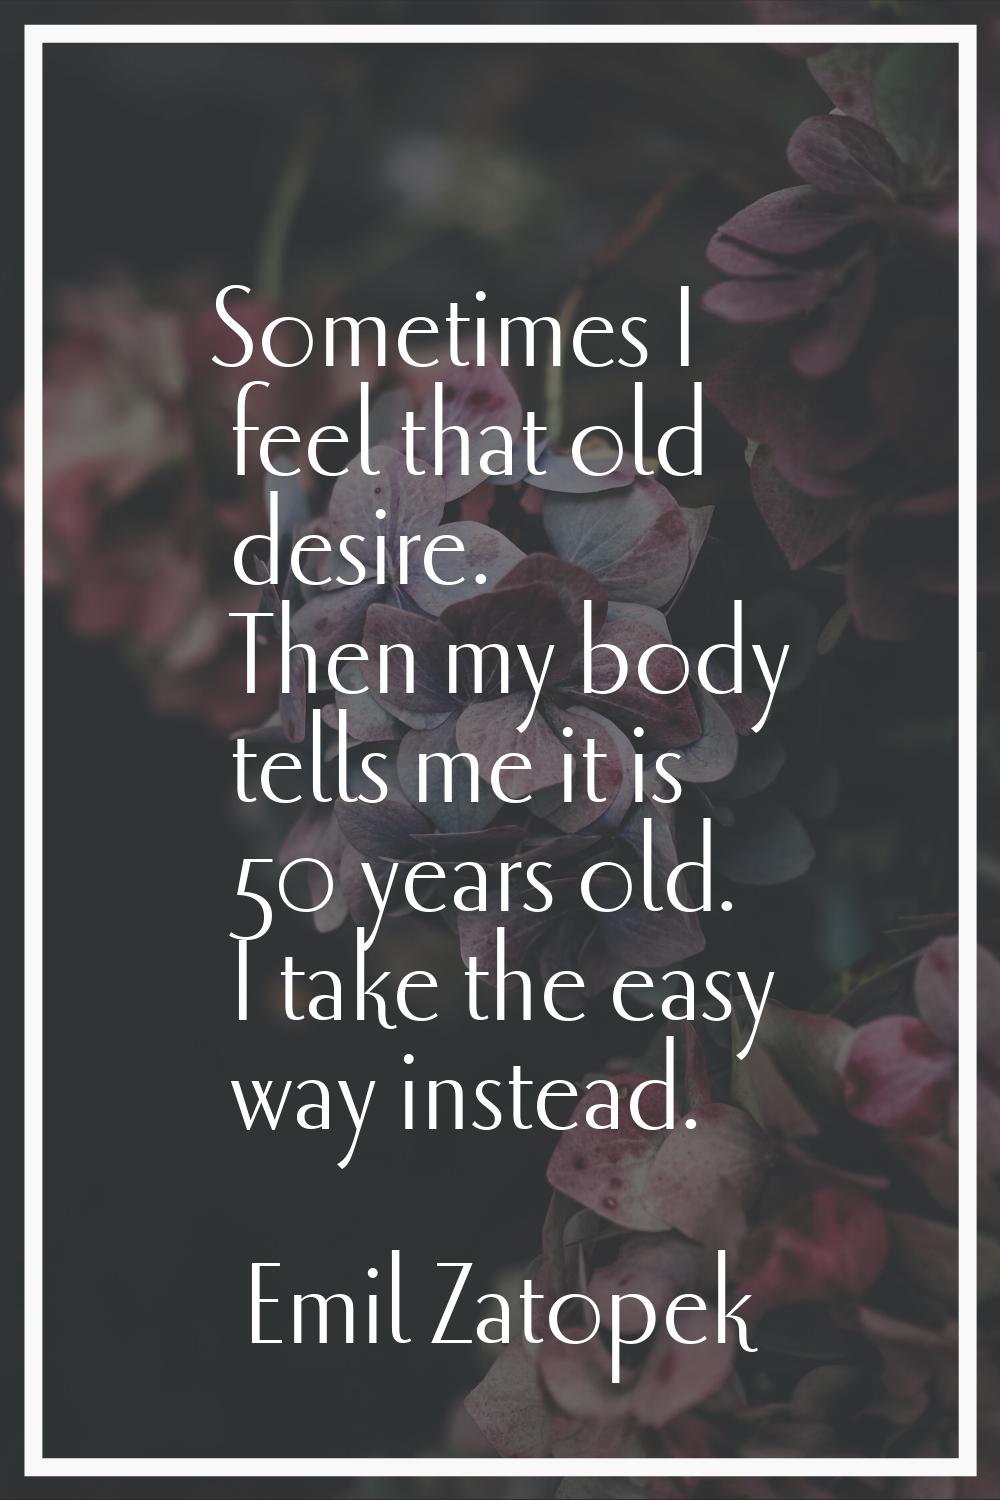 Sometimes I feel that old desire. Then my body tells me it is 50 years old. I take the easy way ins